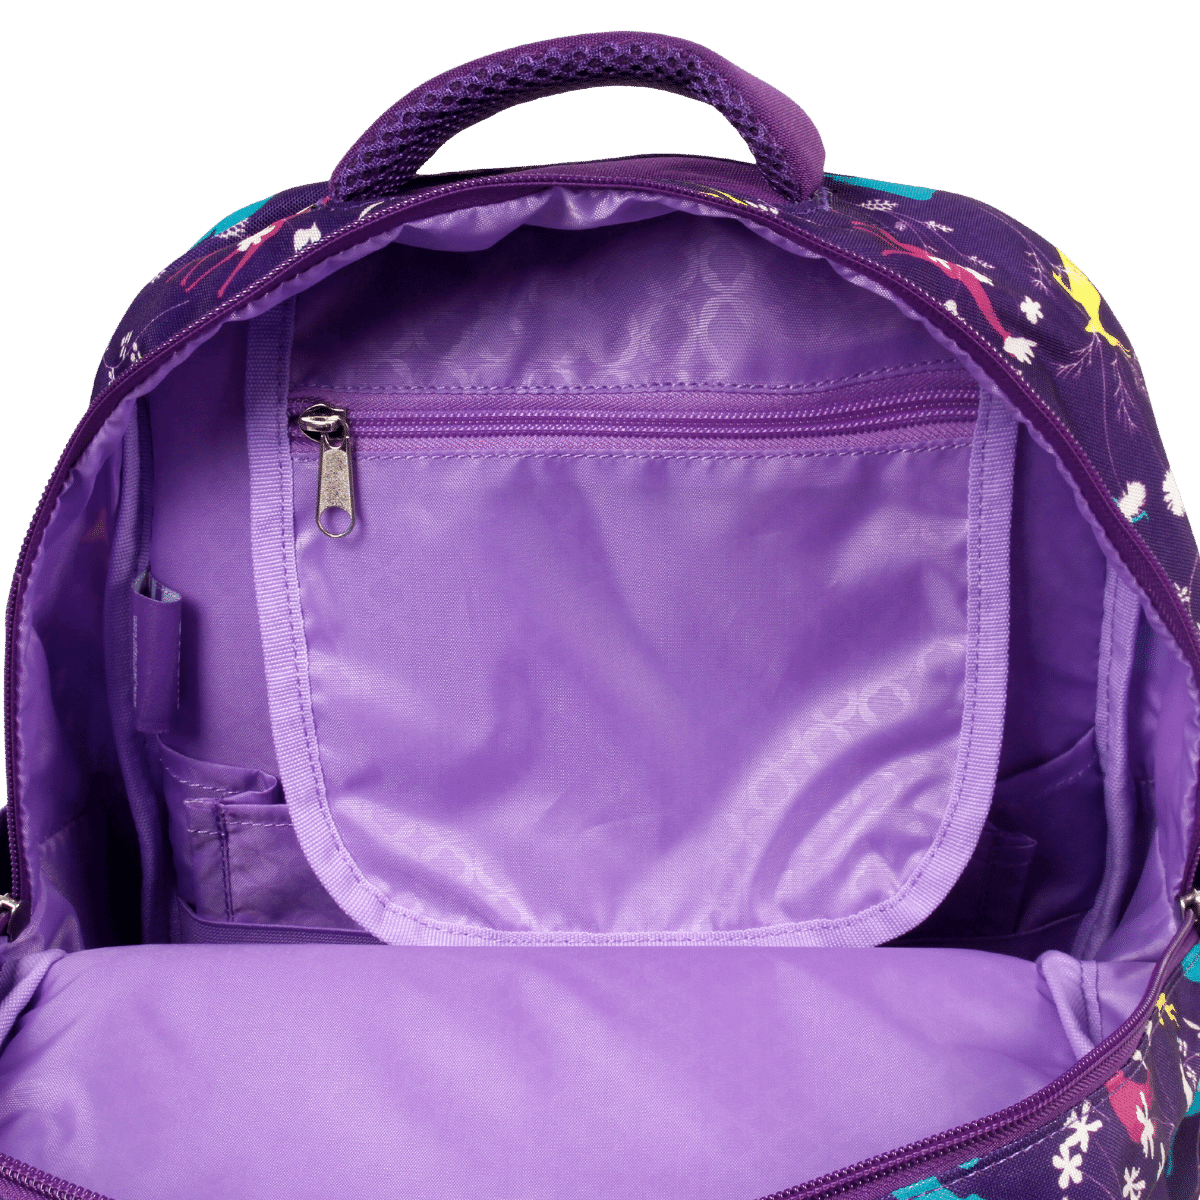 Sprouts Kids Backpack With Pencil Case - JWorldstore